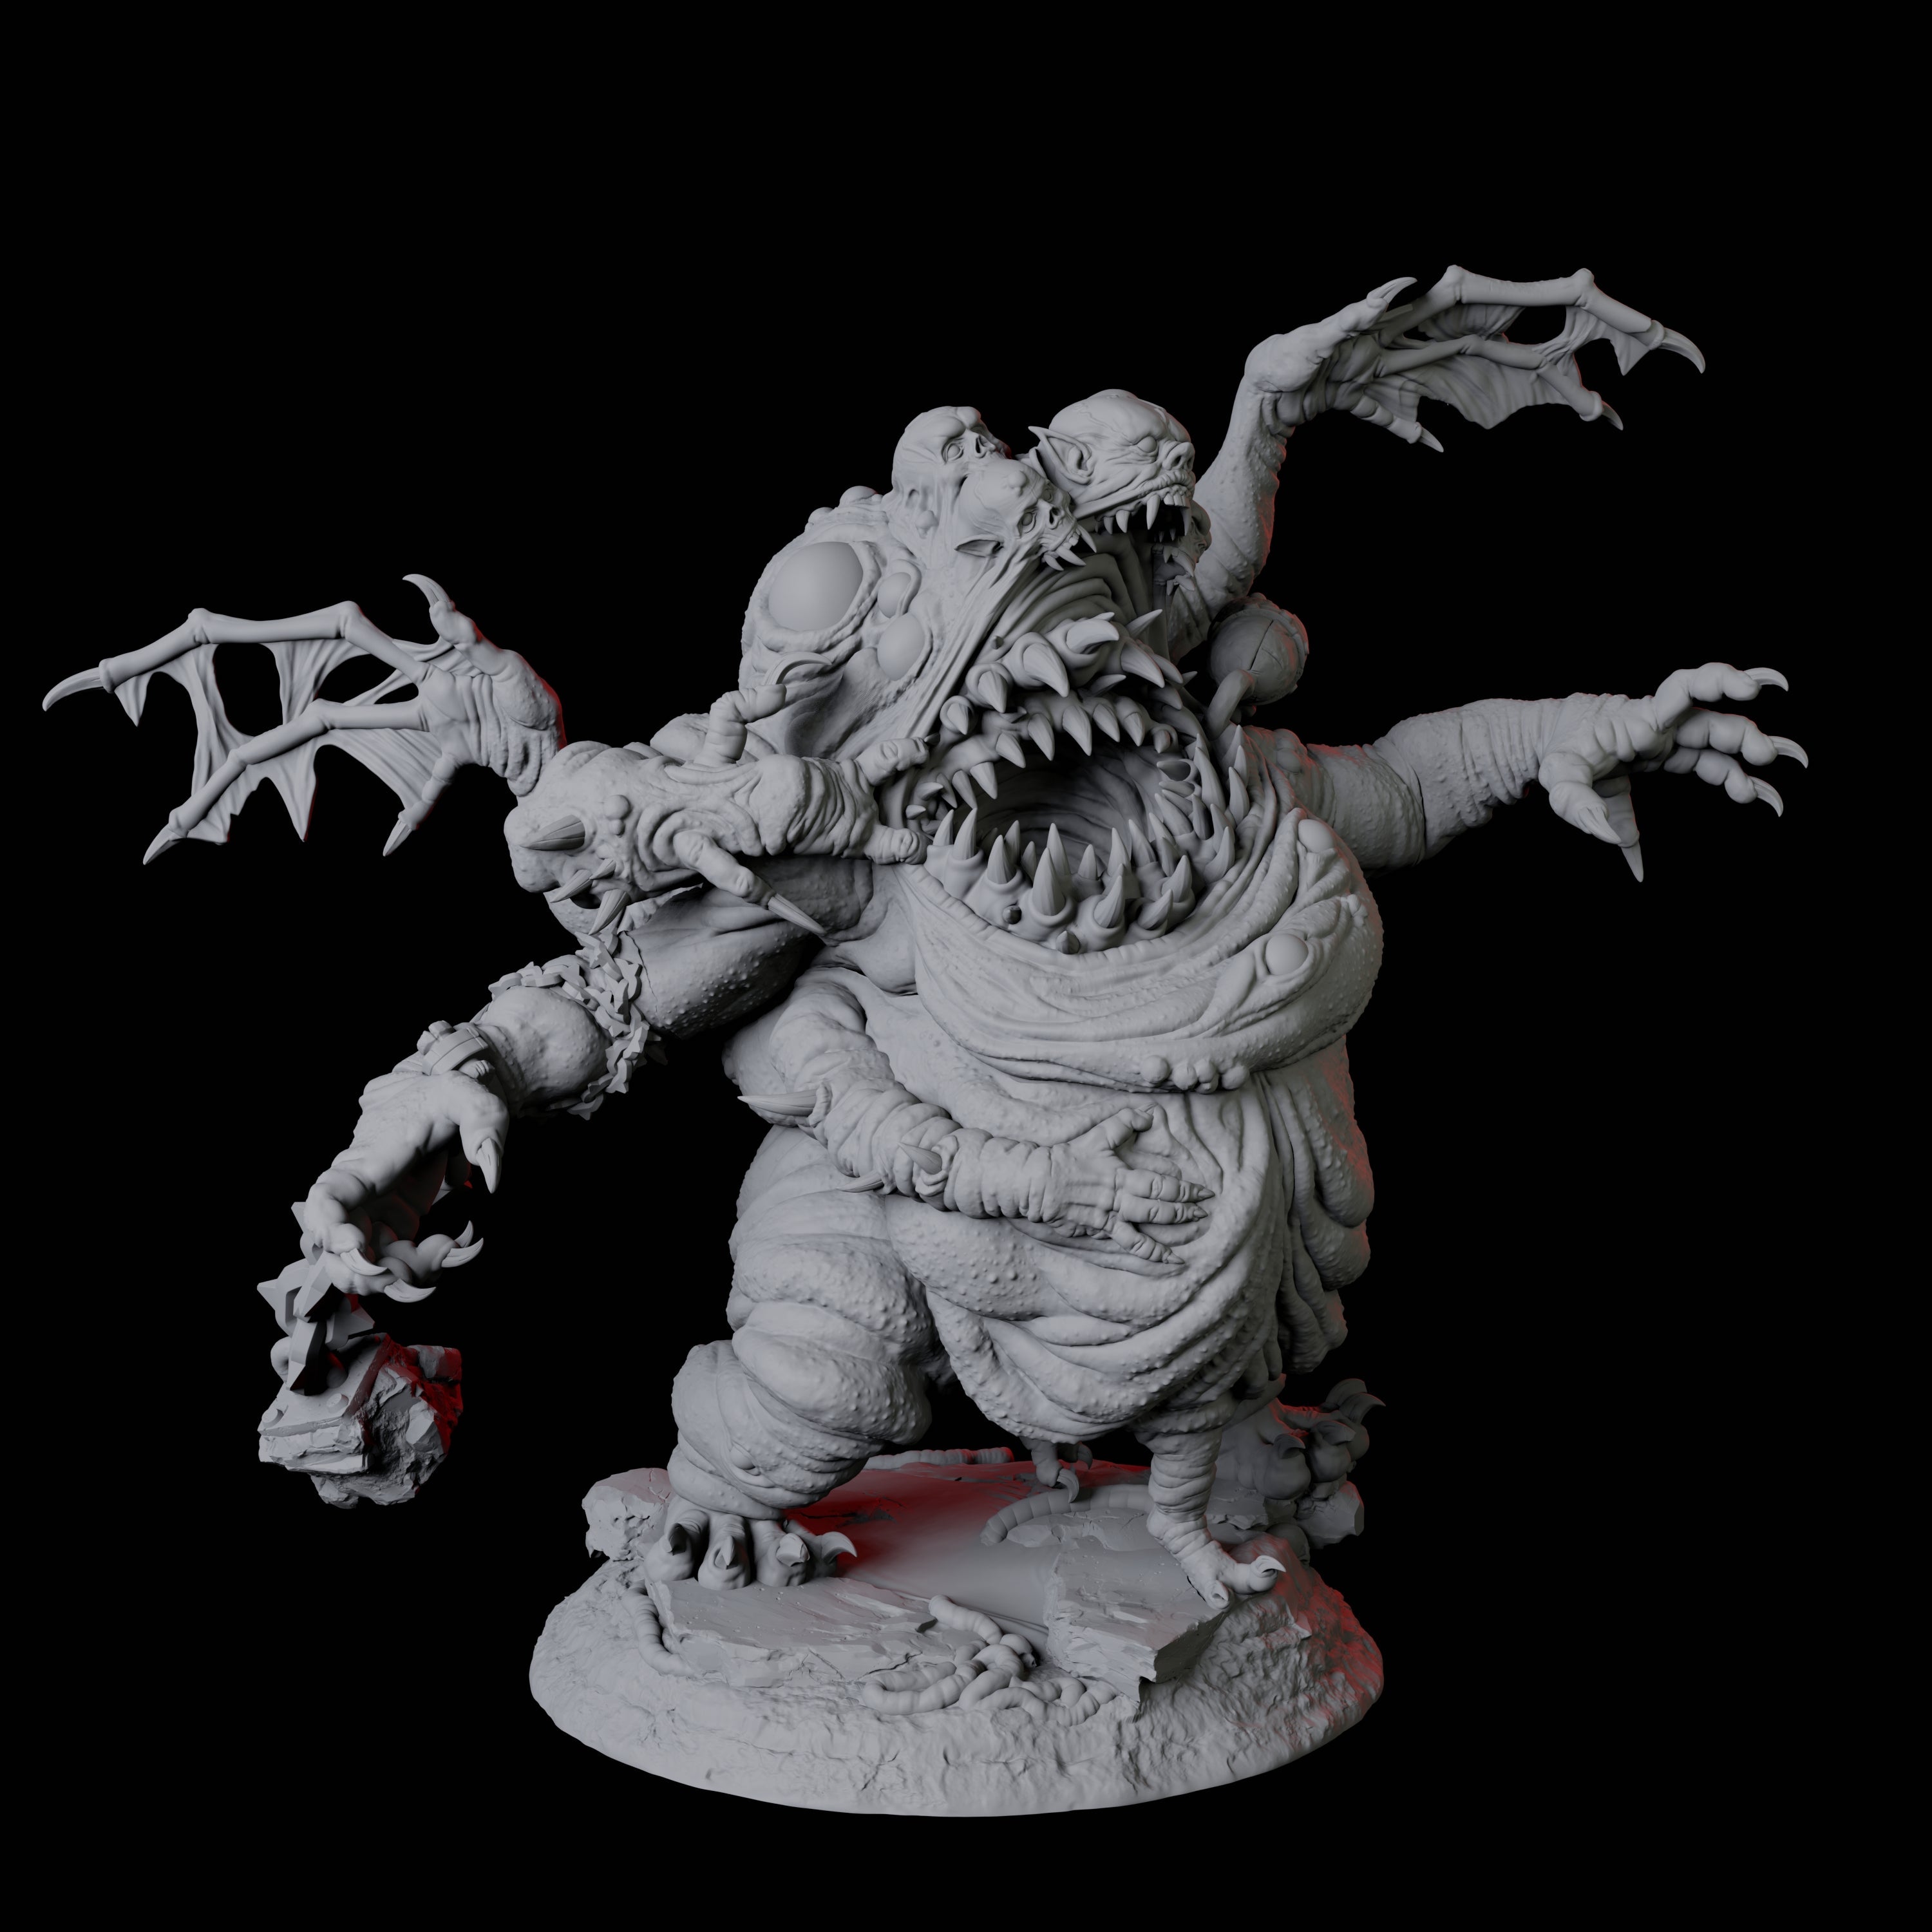 Fleshwarped Irnakurse A Miniature for Dungeons and Dragons, Pathfinder or other TTRPGs